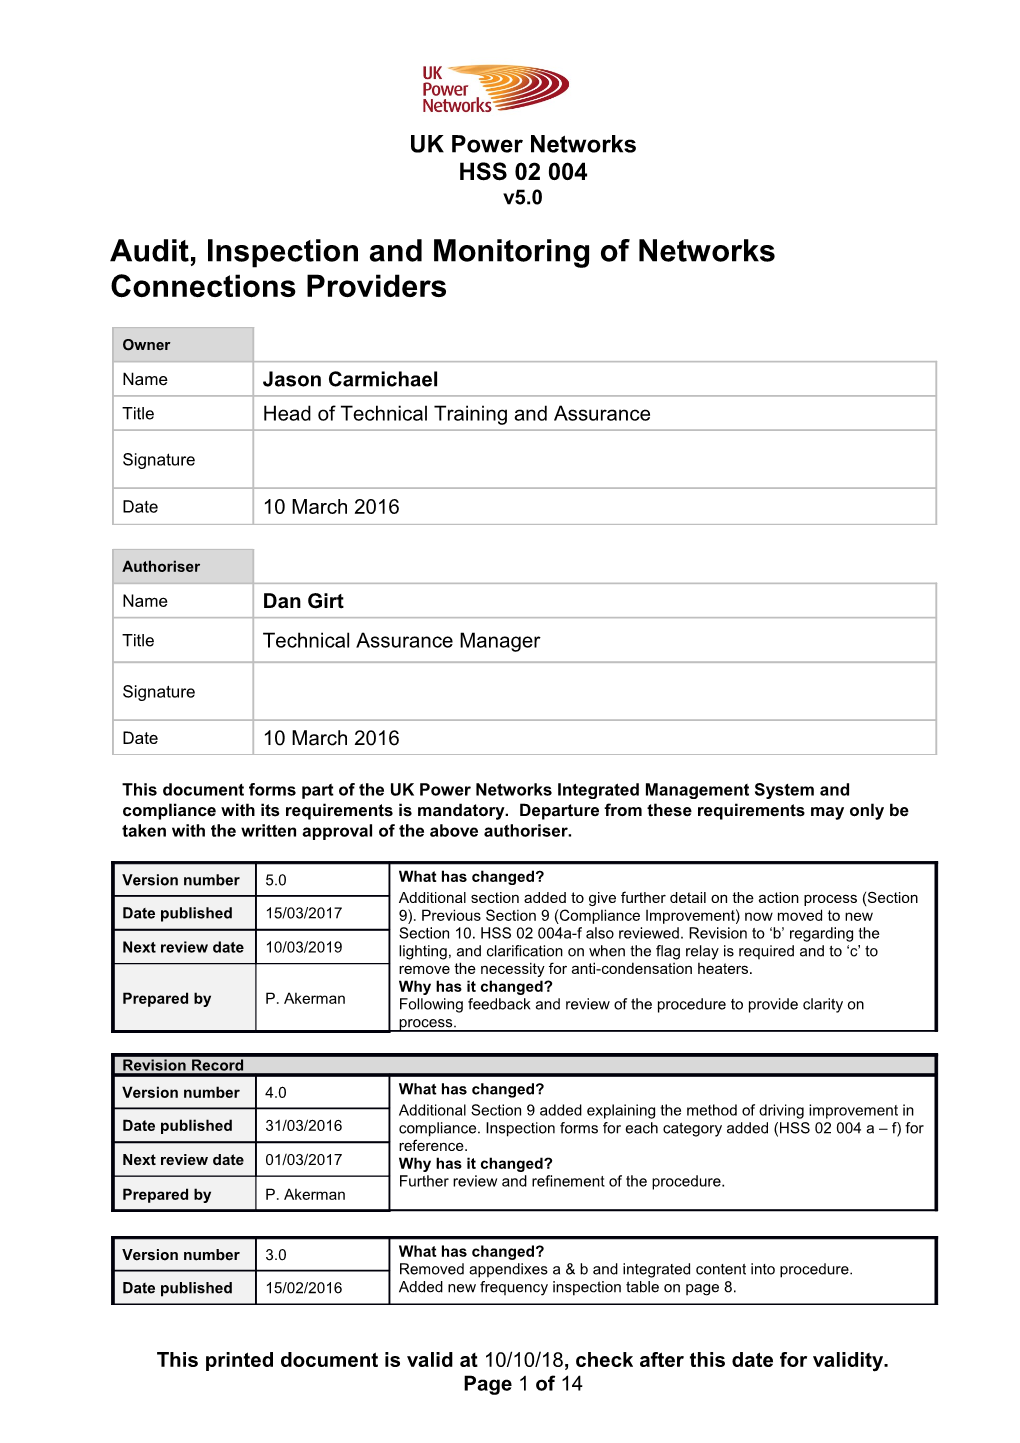 HSS 02 004 Audit, Inspection and Monitoring of Networks Connections Providers